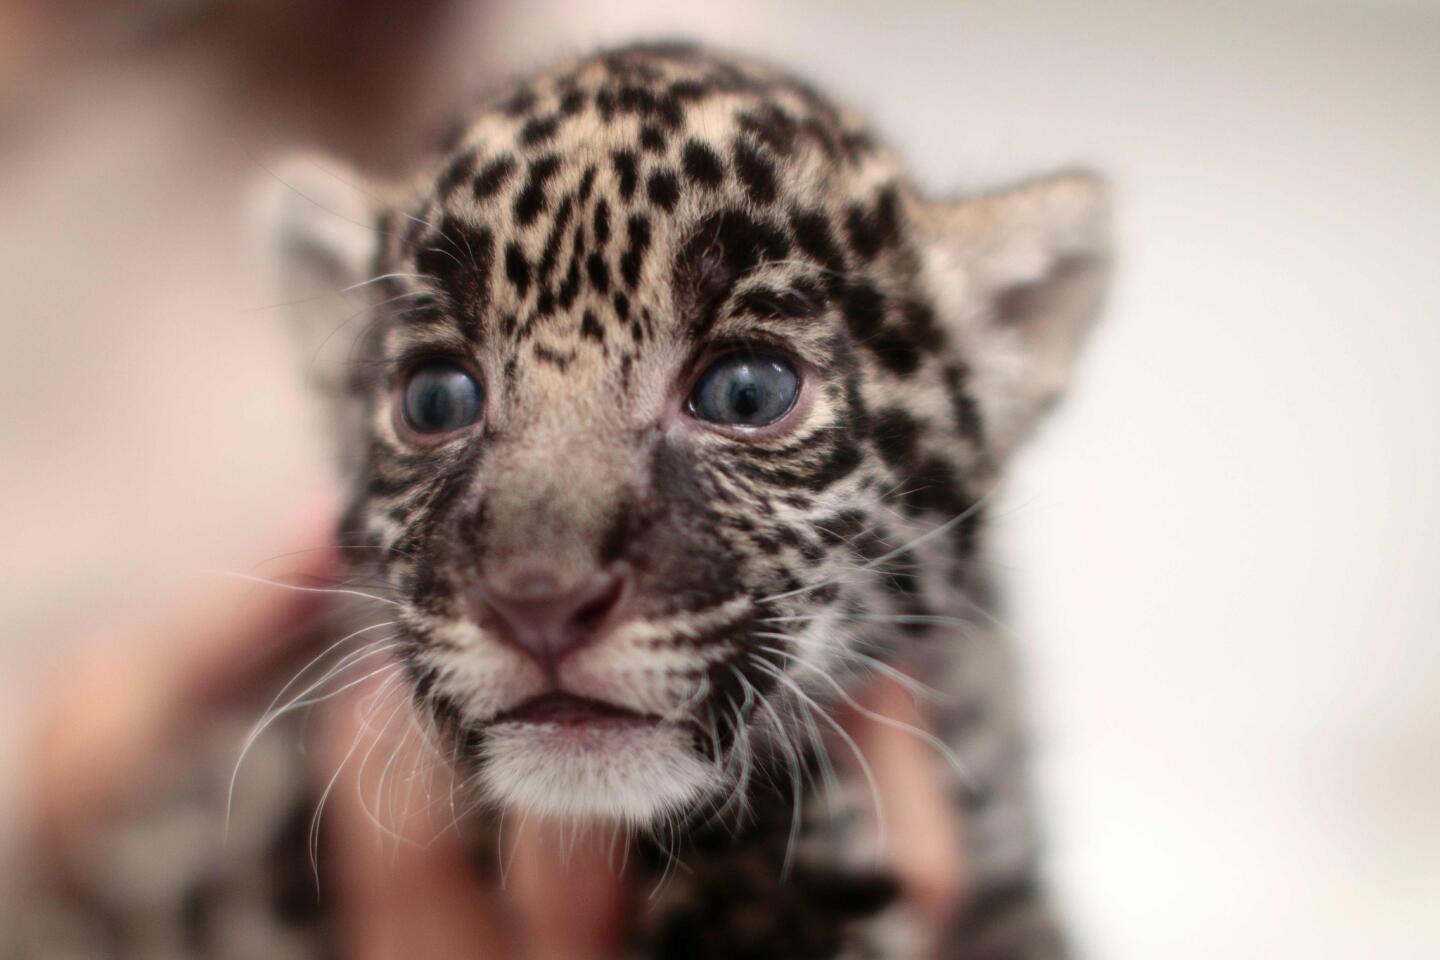 A jaguar cub is held by an employee at the Reino Animal zoo in Teotihuacan, Mexico, on June 16, 2016. Three jaguars were born in captivity May 23.